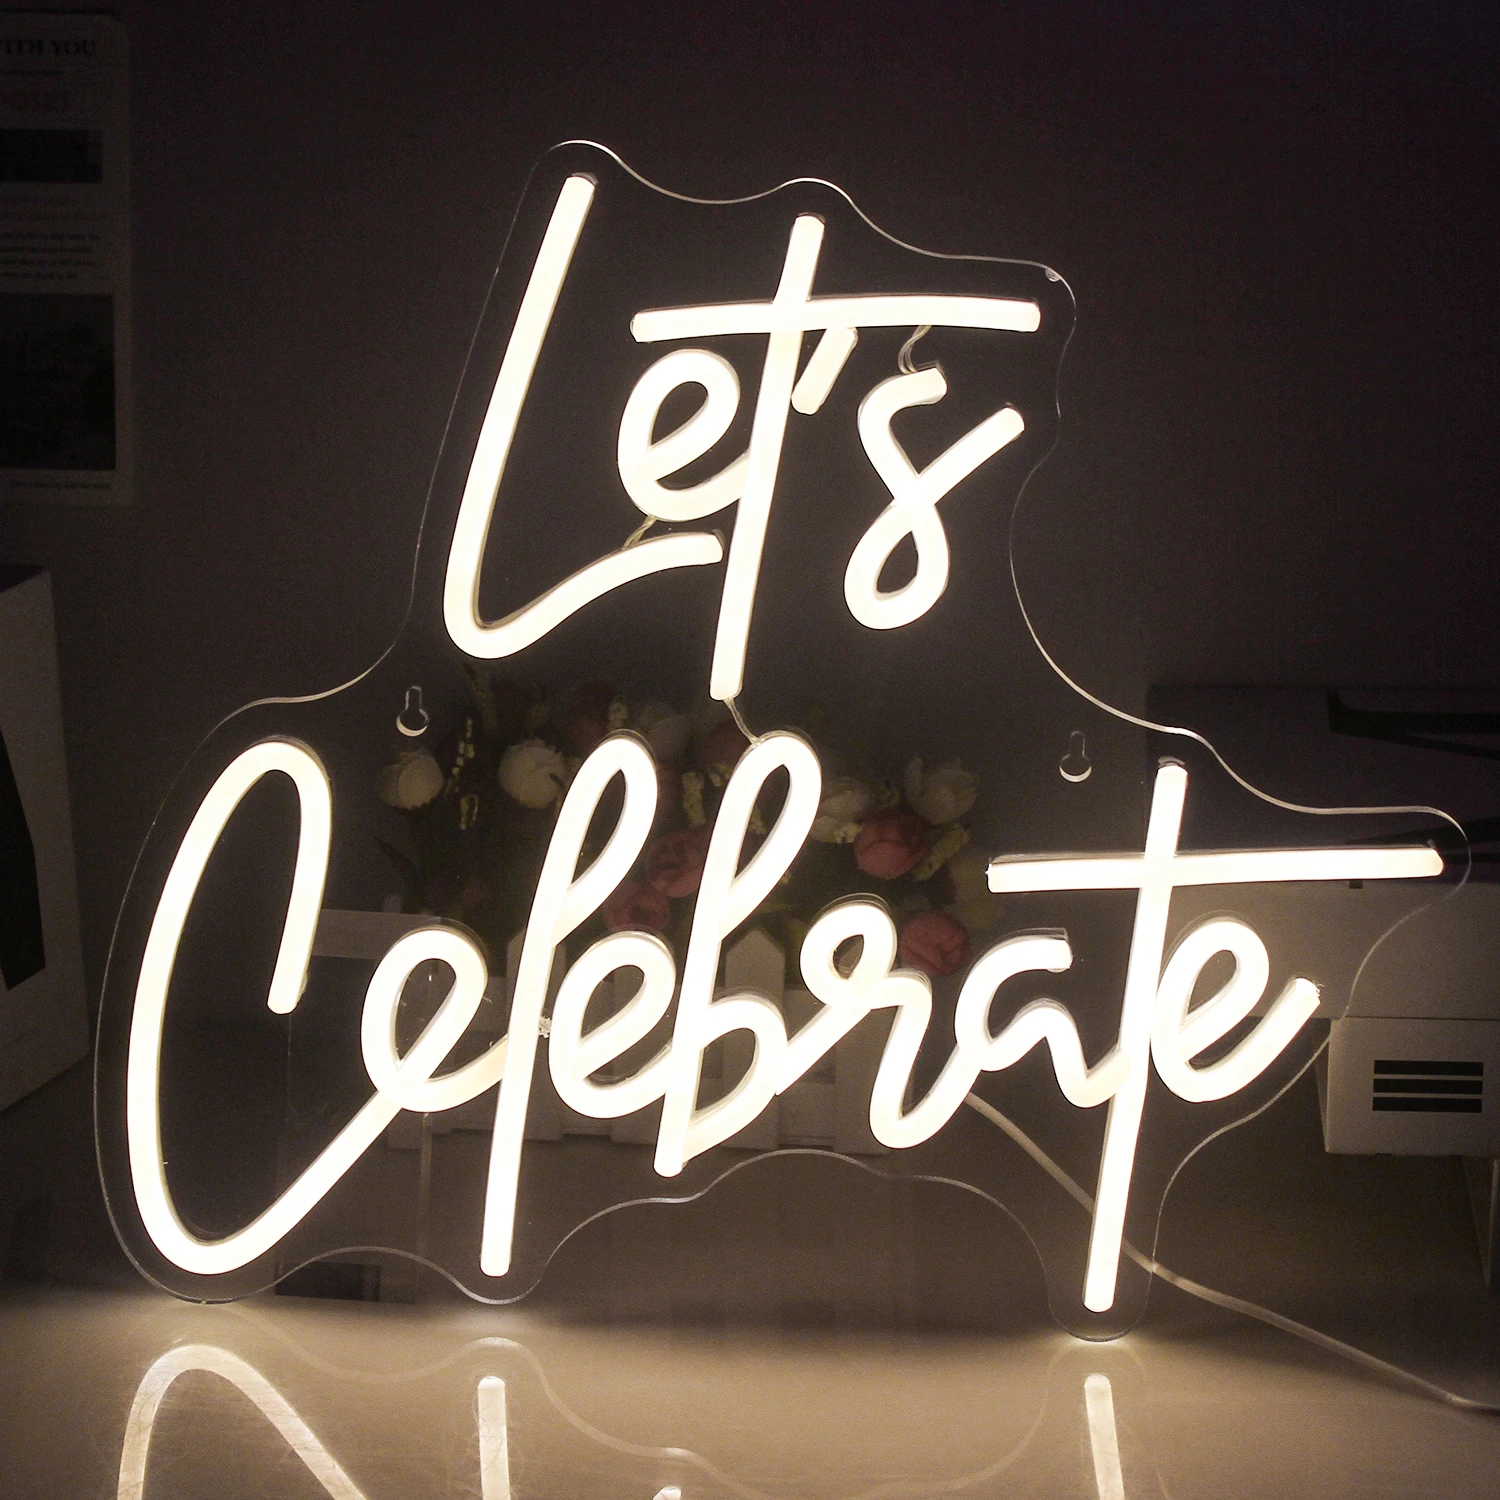 Let's Celebrate LED Neon Light Sign USB Christmas Birthday Party Bar Club Hotle Wedding Wall Decor Neon Night Lamps Decor